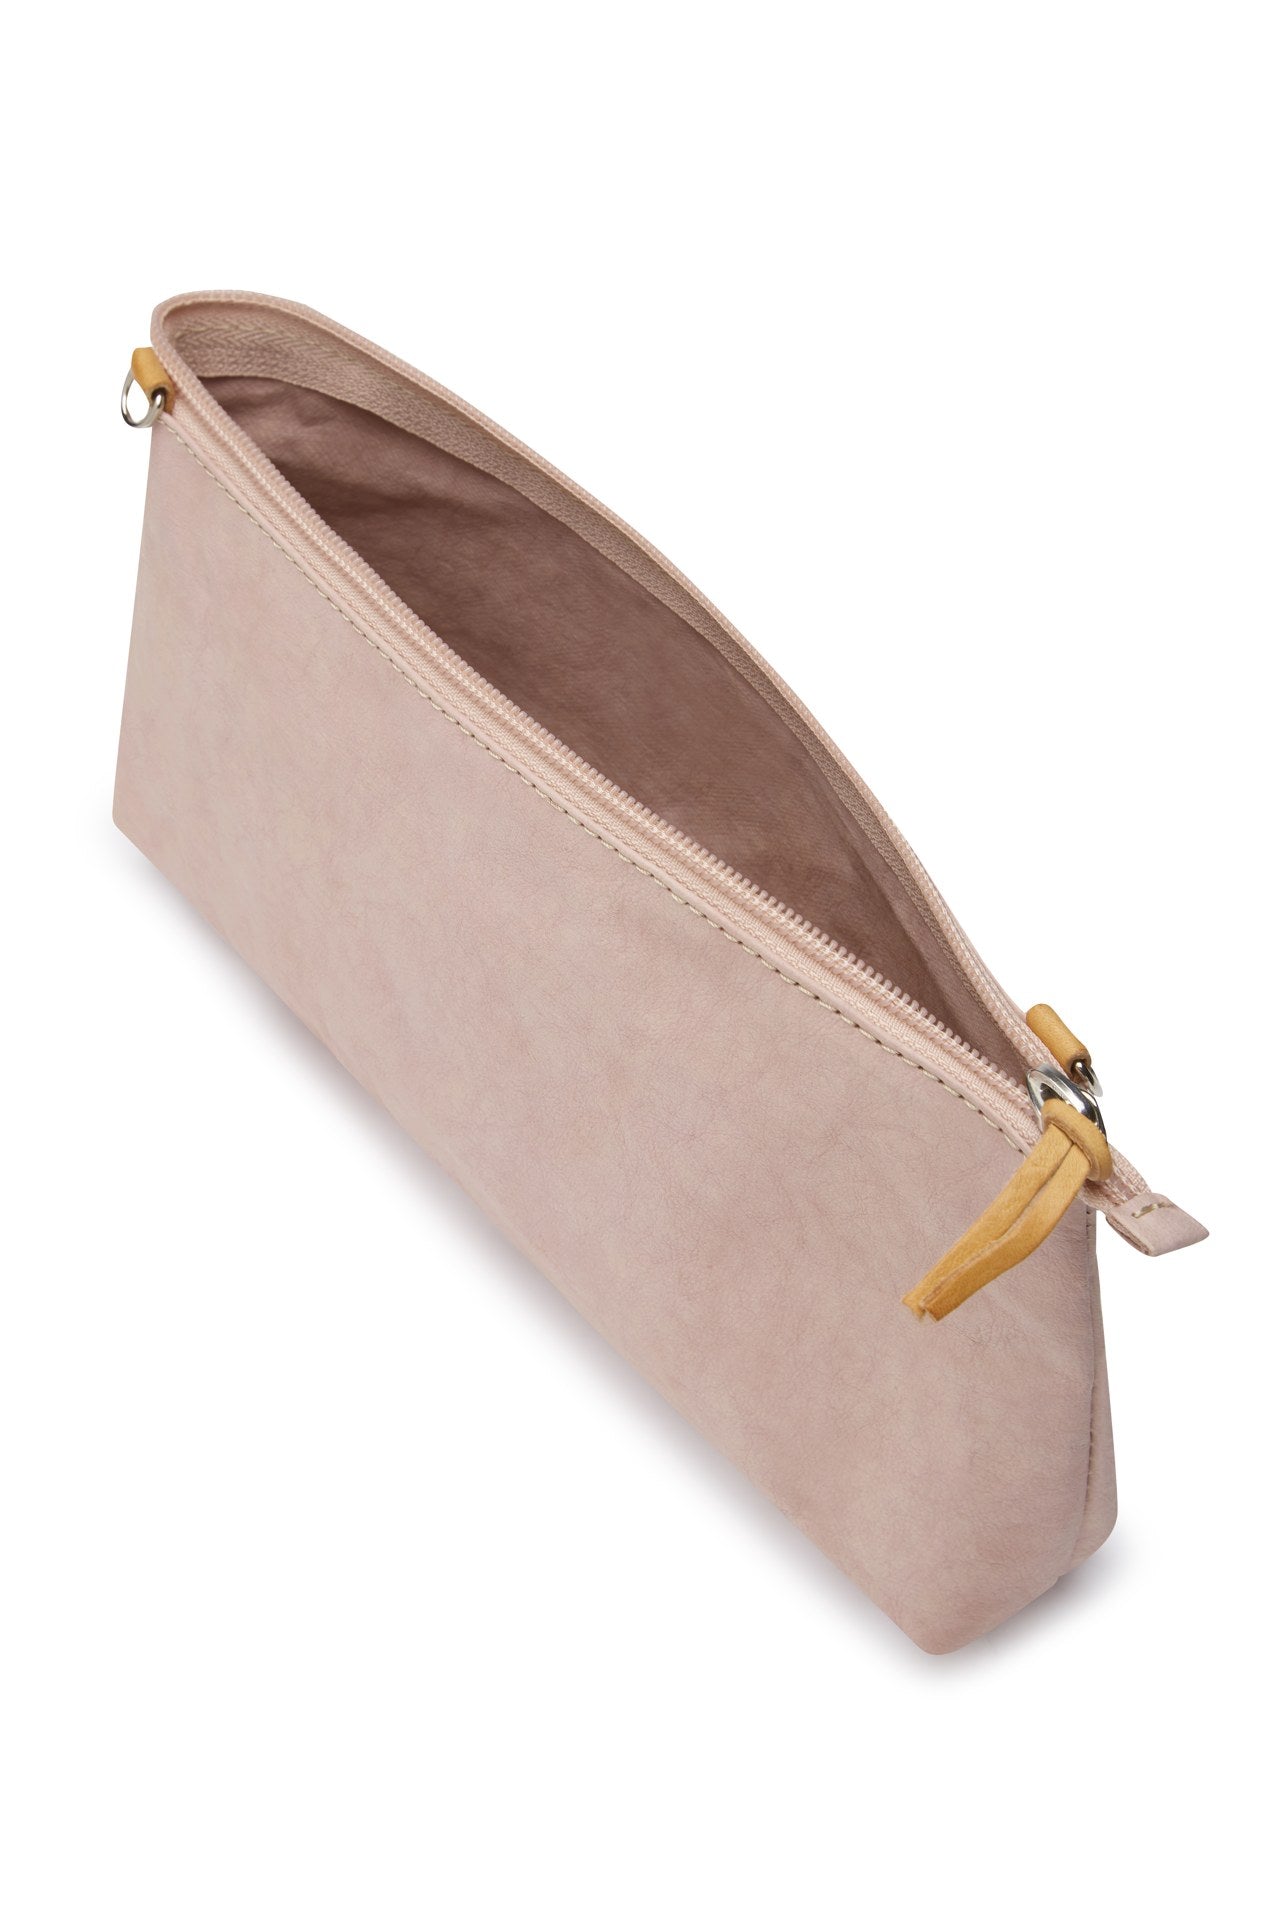 A washable paper bag in pale pink is shown with the strap removed, open and unzipped with a tan zip toggle.